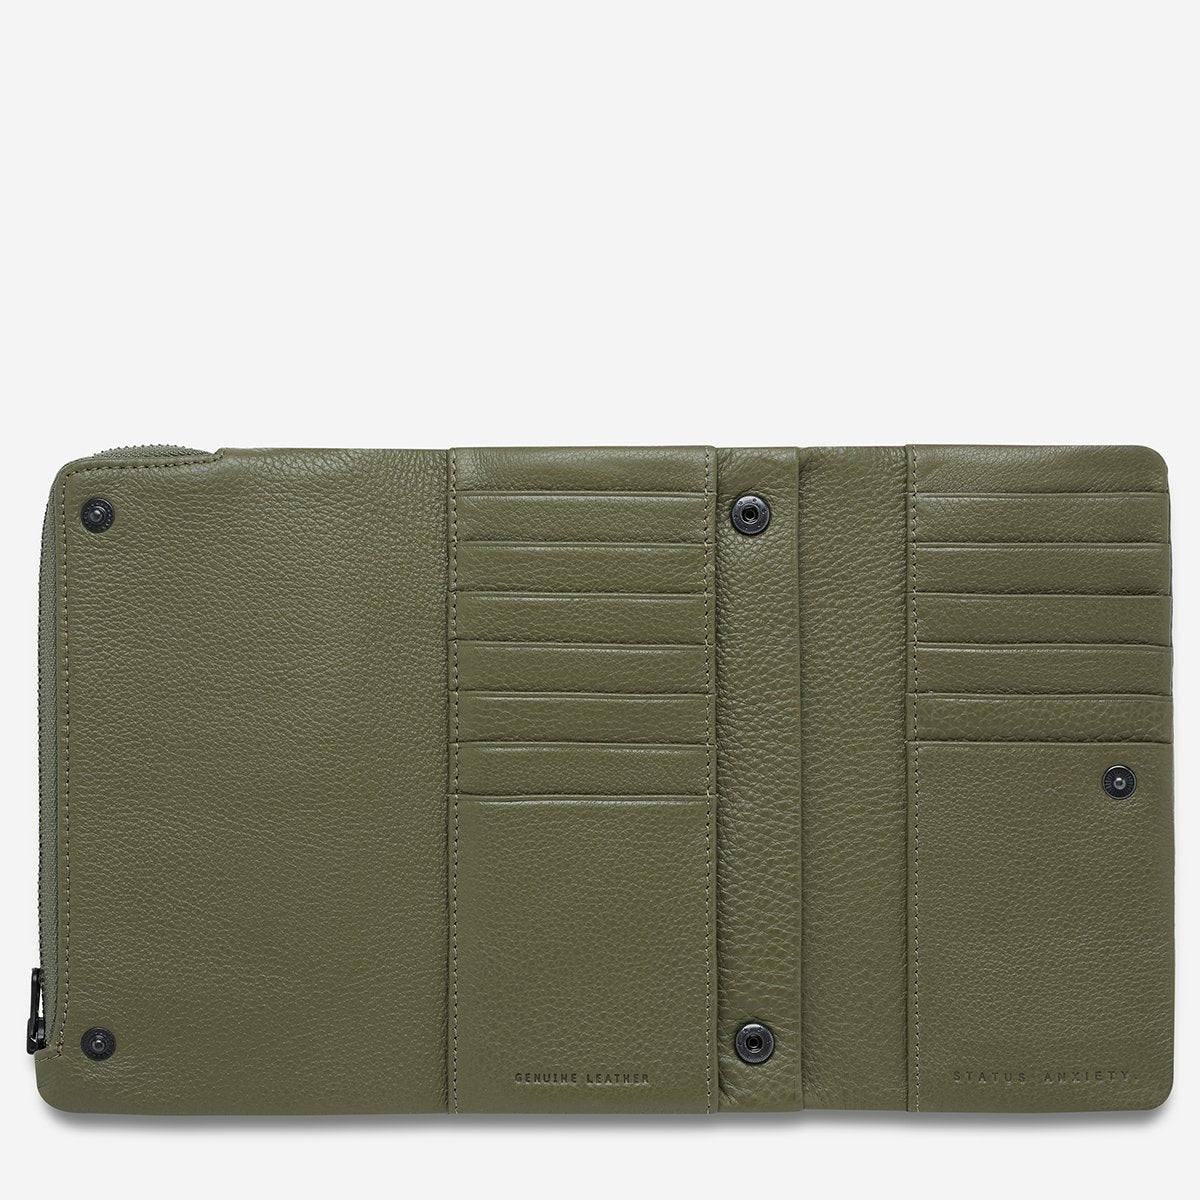 Status Anxiety Audrey Wallet in Khaki Pebble Opened